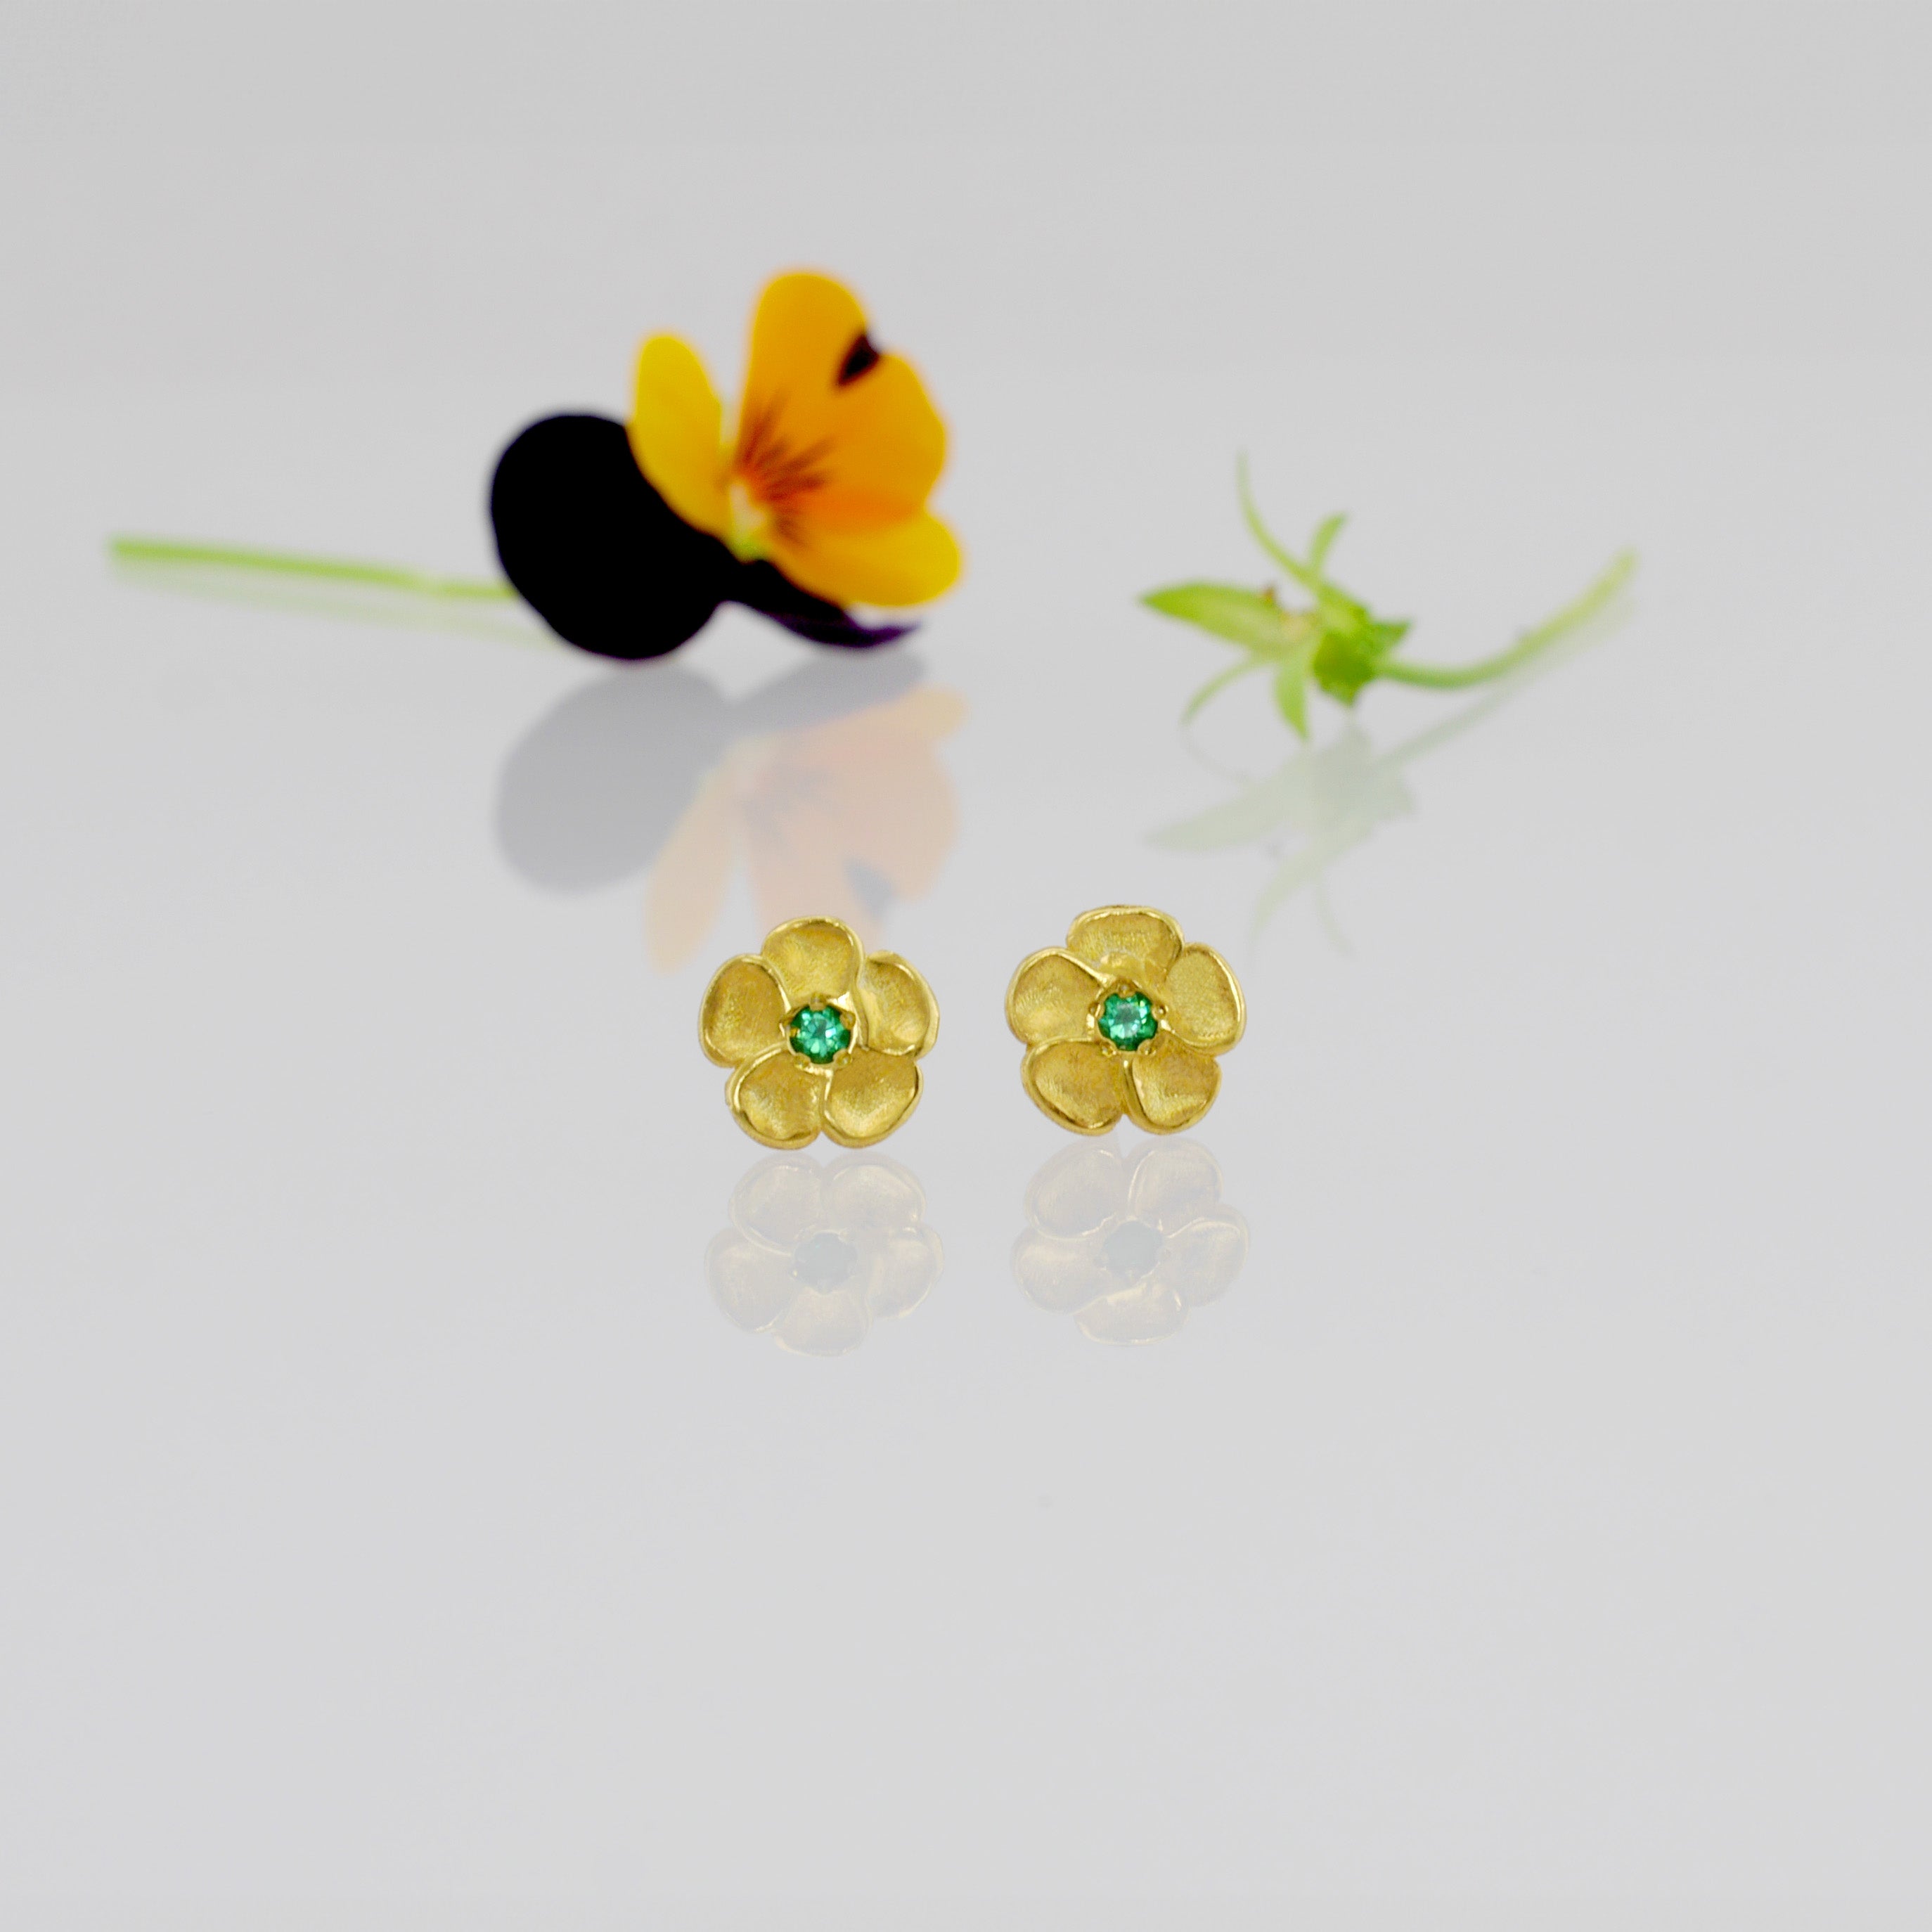 Delicate yellow gold flower stud earrings with a sparkling Emerald center. Perfect for any occasion!